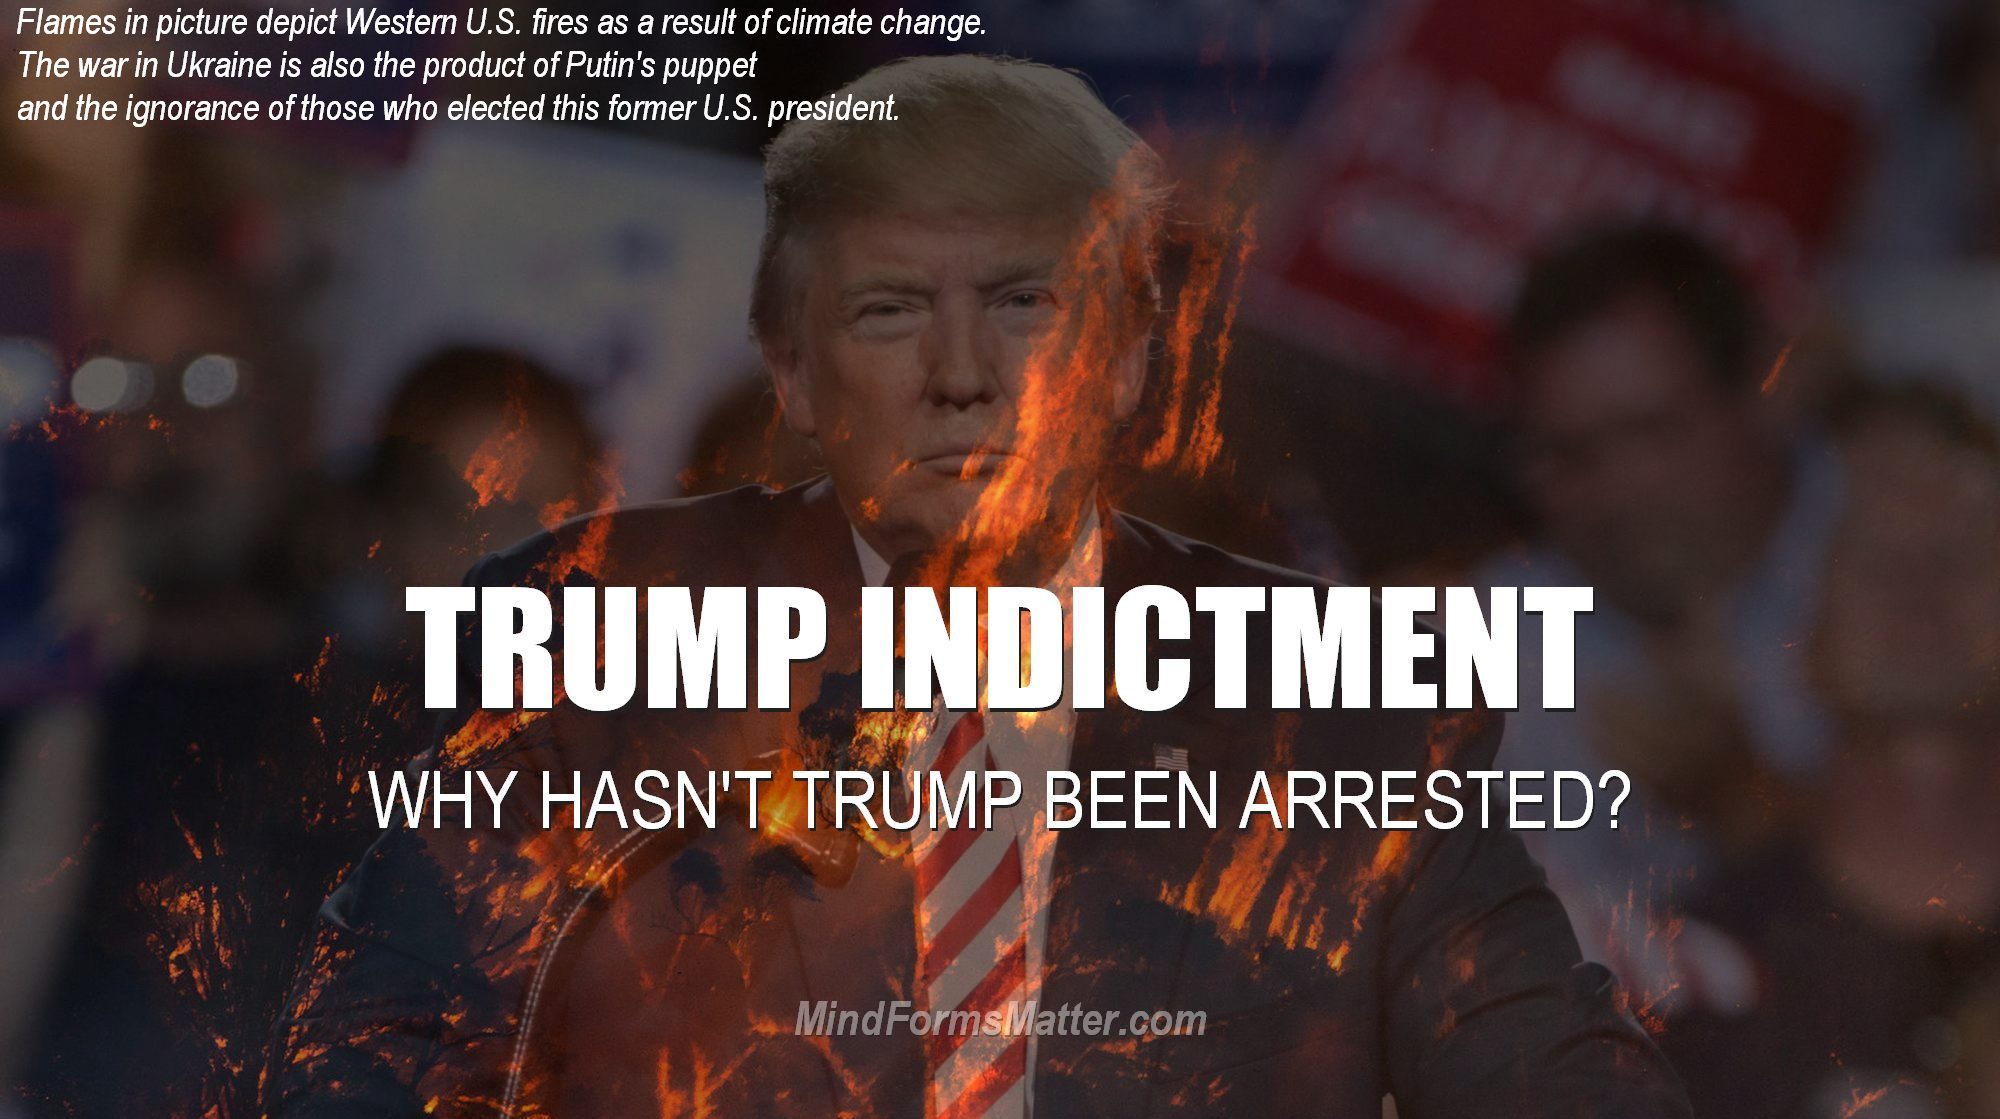 Why hasn't Trump already been subpoenaed, indicted, arrested and sent to prison? When will he be?